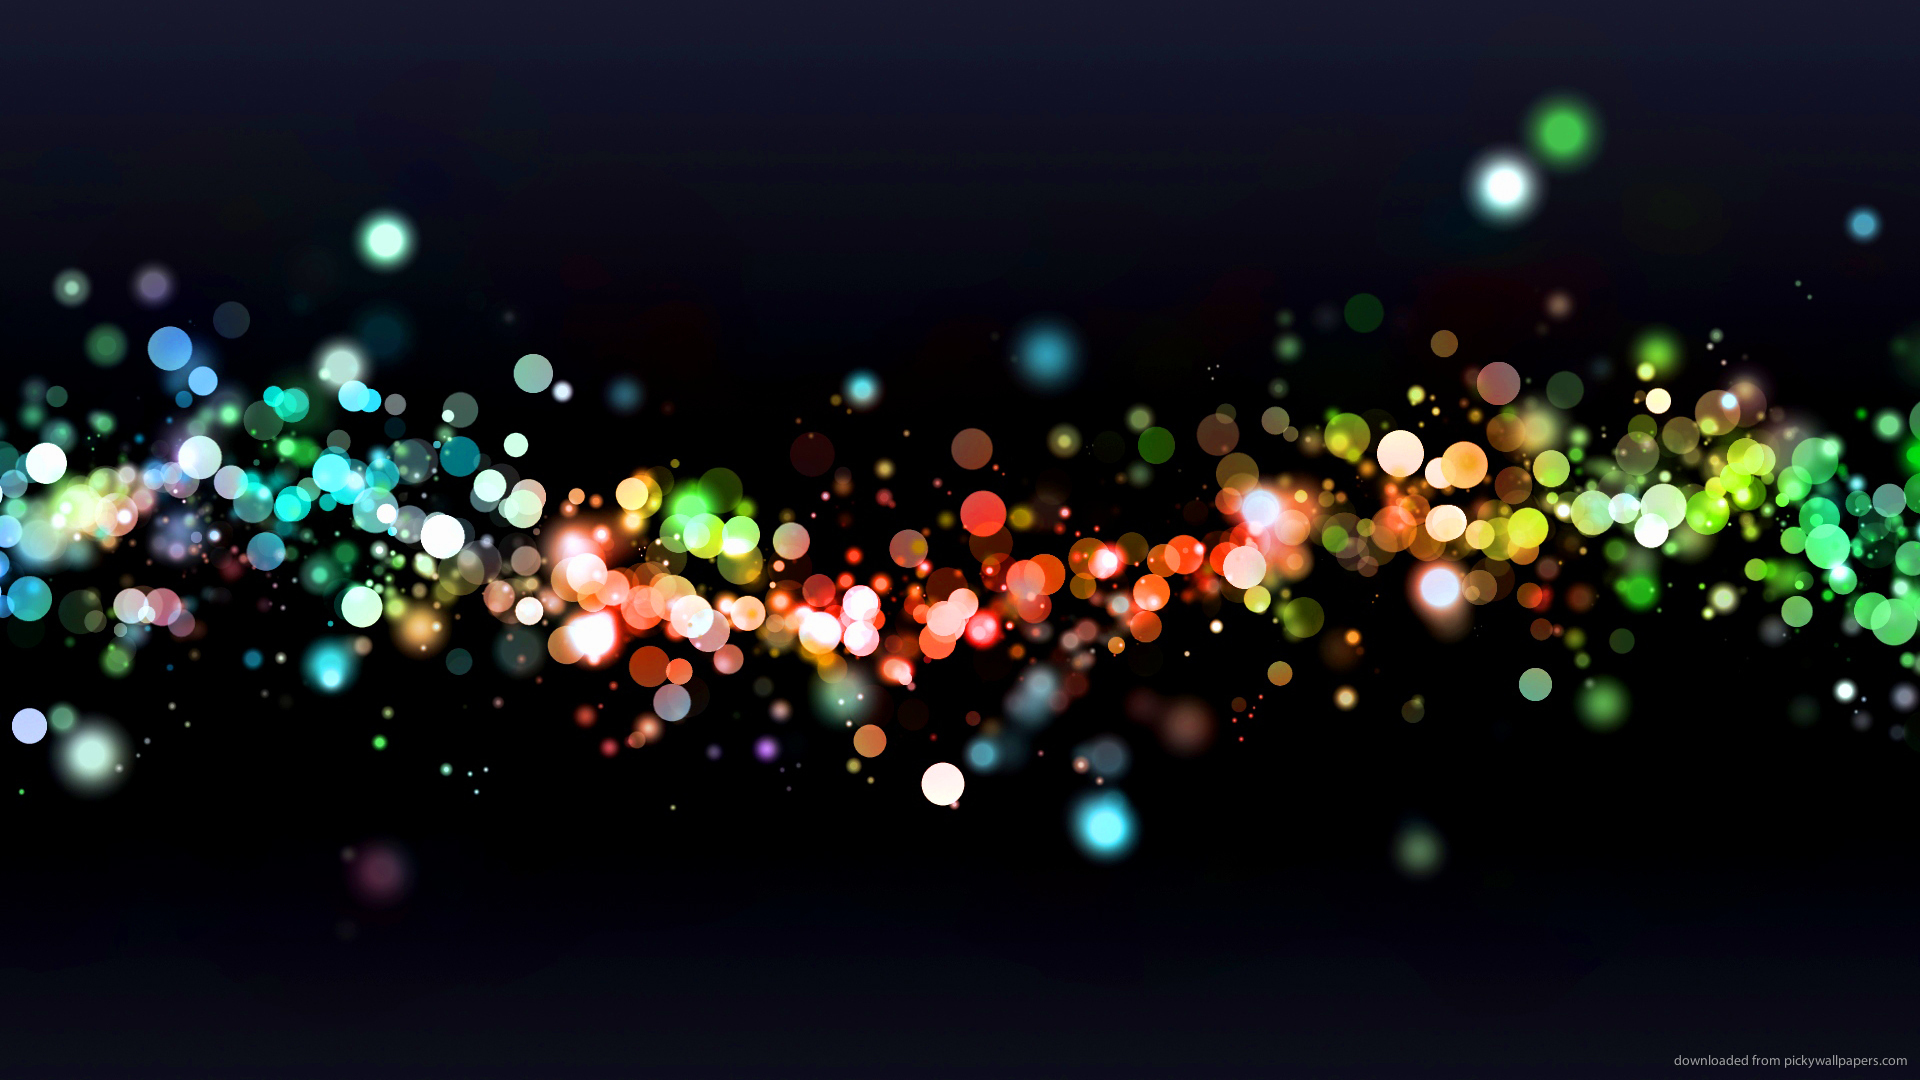 HD Cool Sparkly Rounds Wallpaper